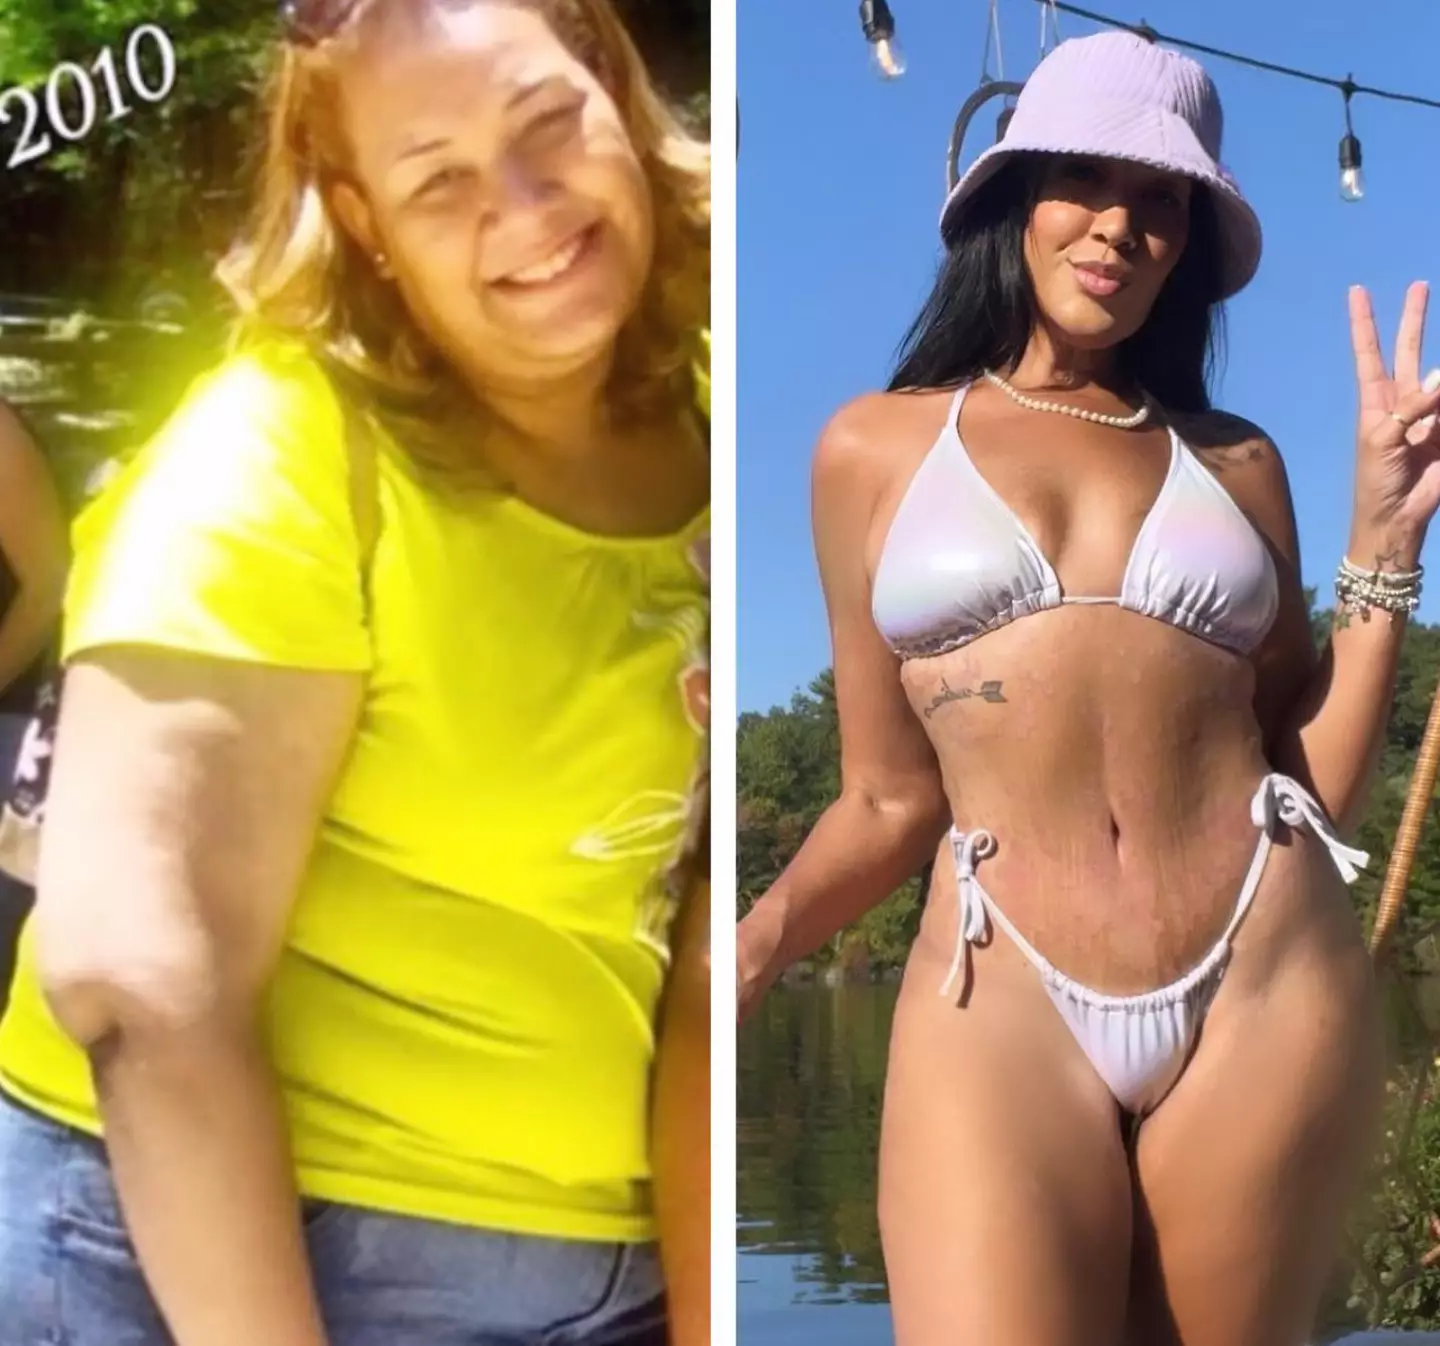 The social media star regularly updated her fans on her weight loss journey.